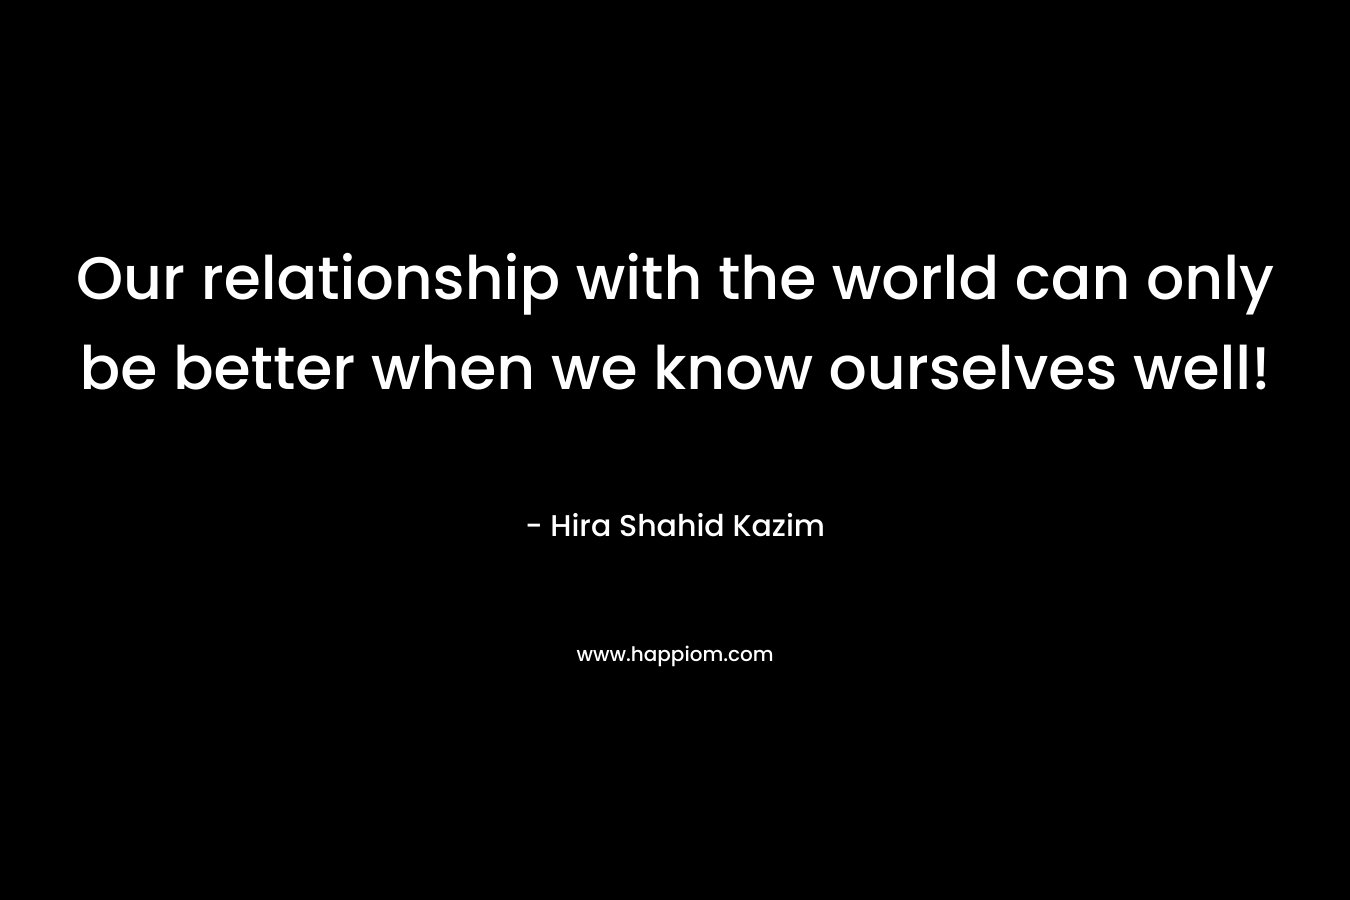 Our relationship with the world can only be better when we know ourselves well!